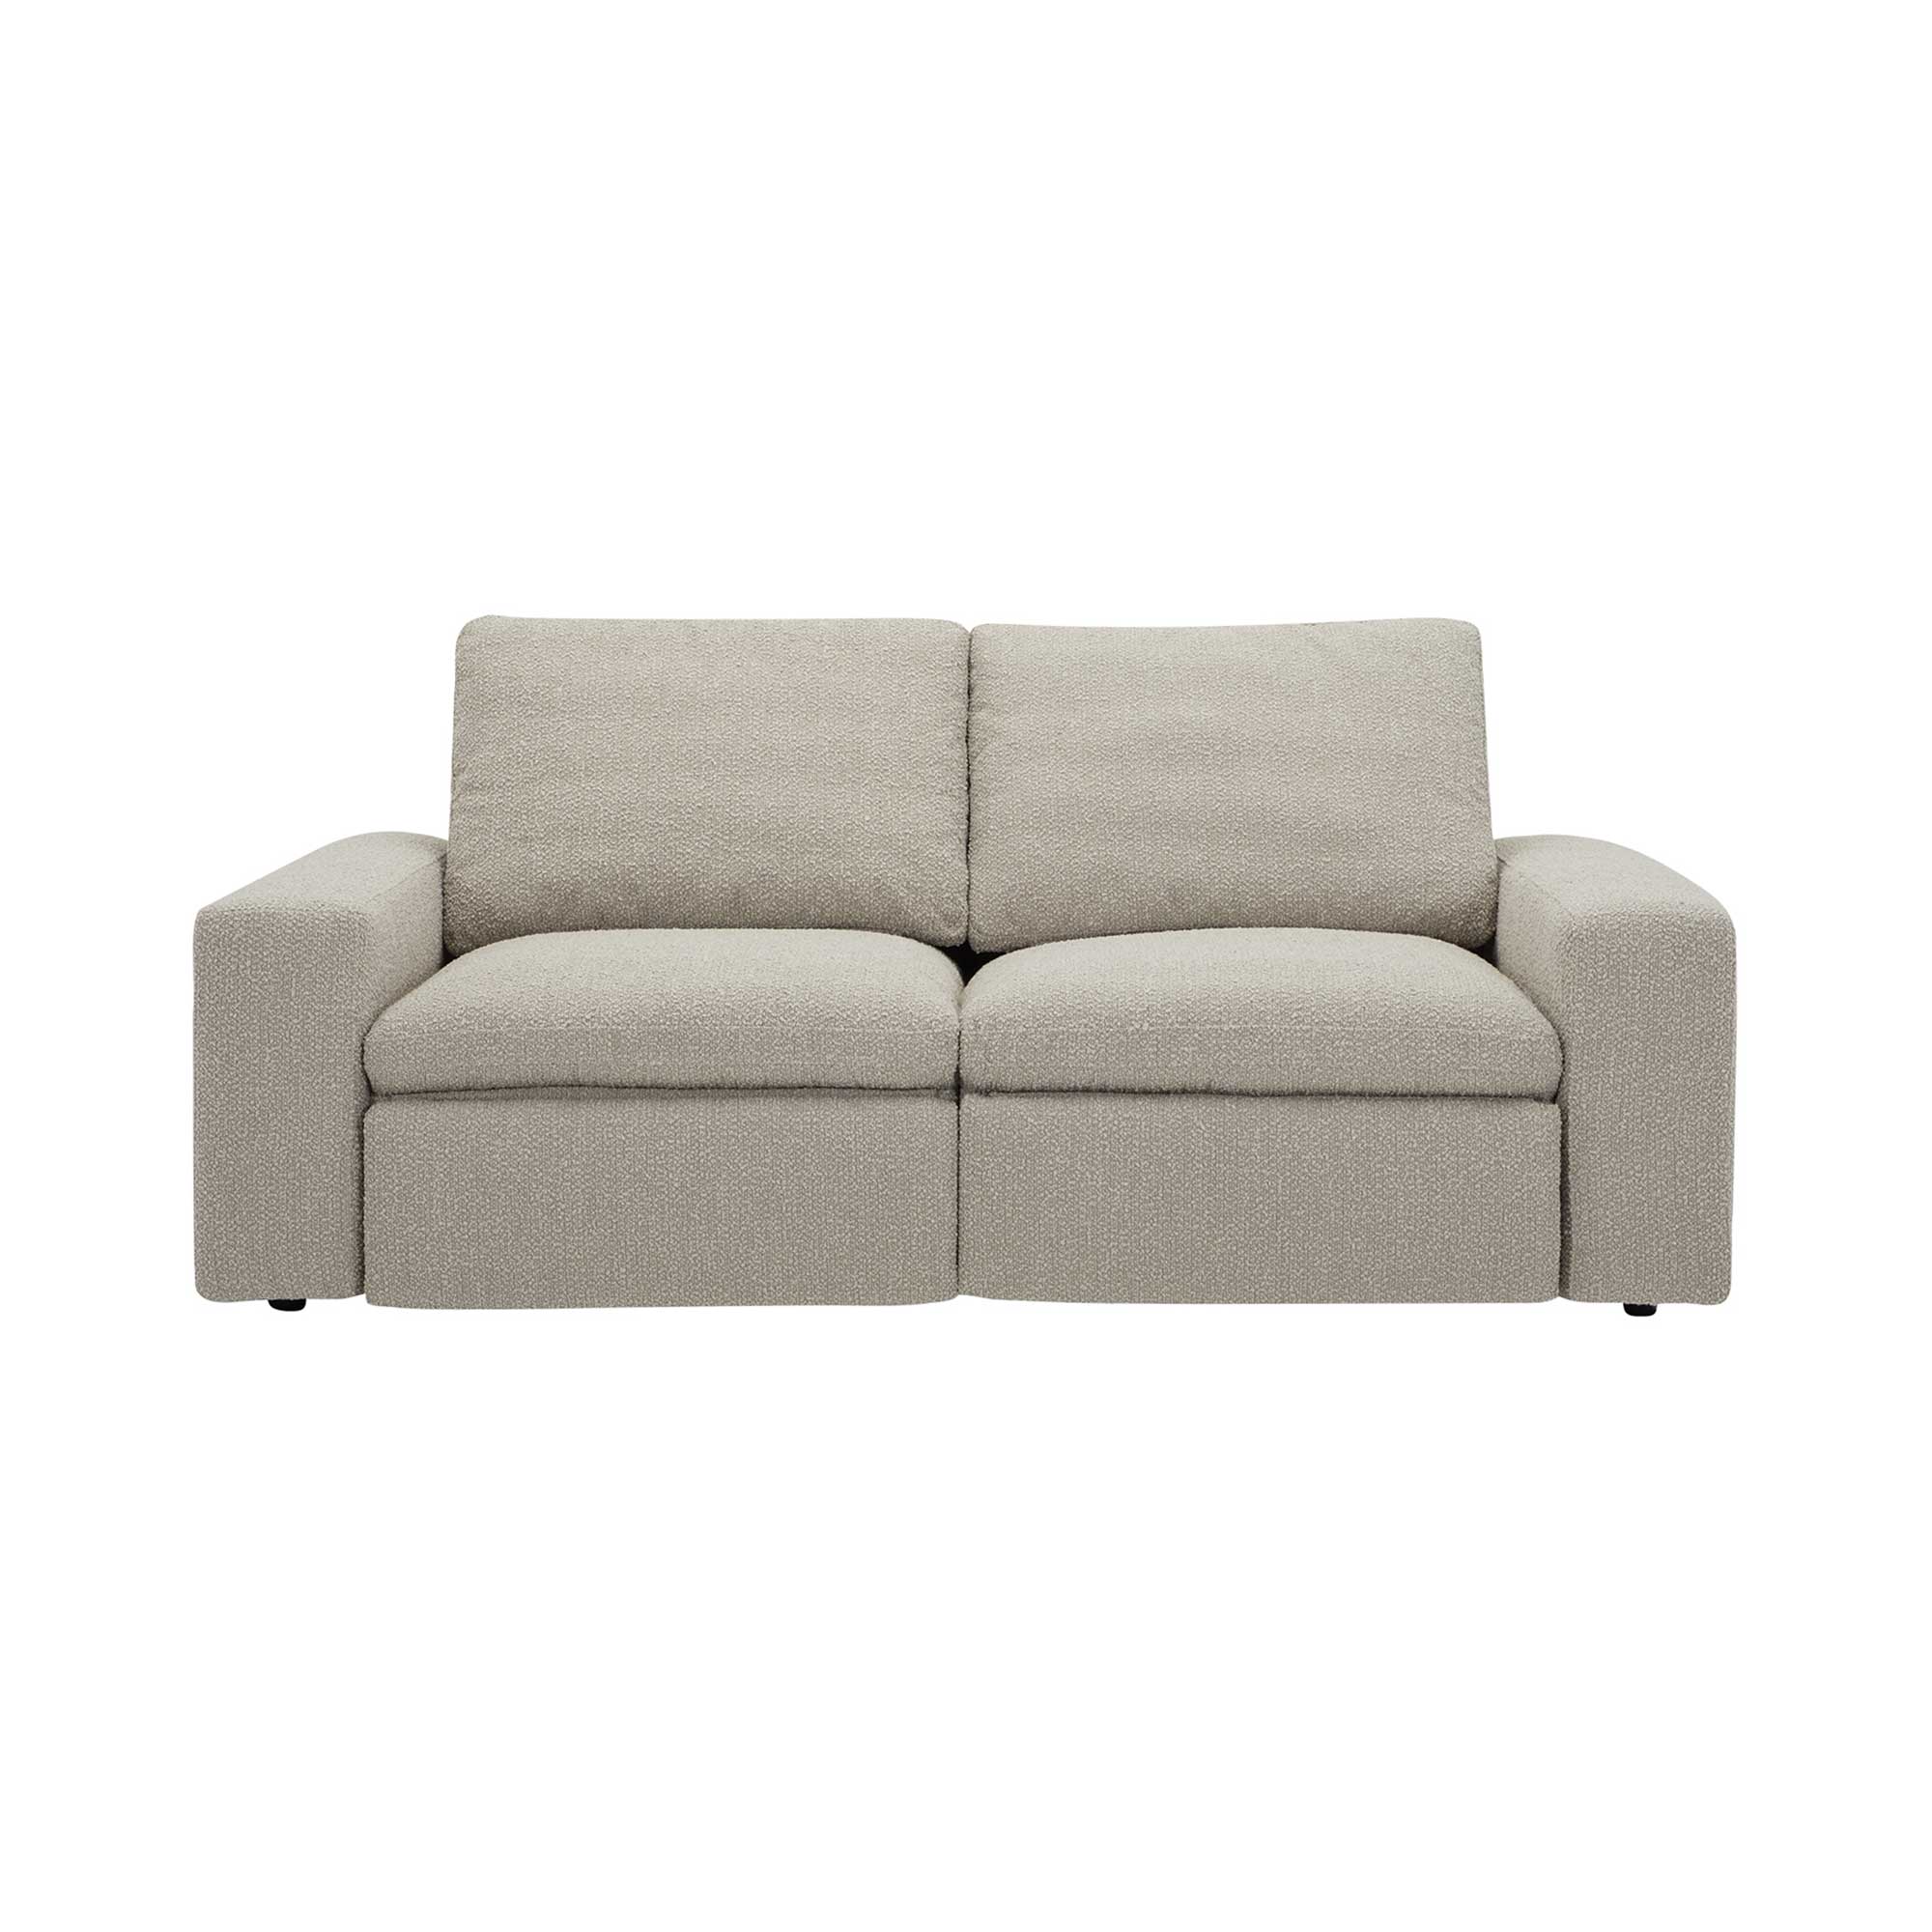 Thoreau Electric Recliner 3 Seater Recliner Sofa, Neutral Fabric | Barker & Stonehouse